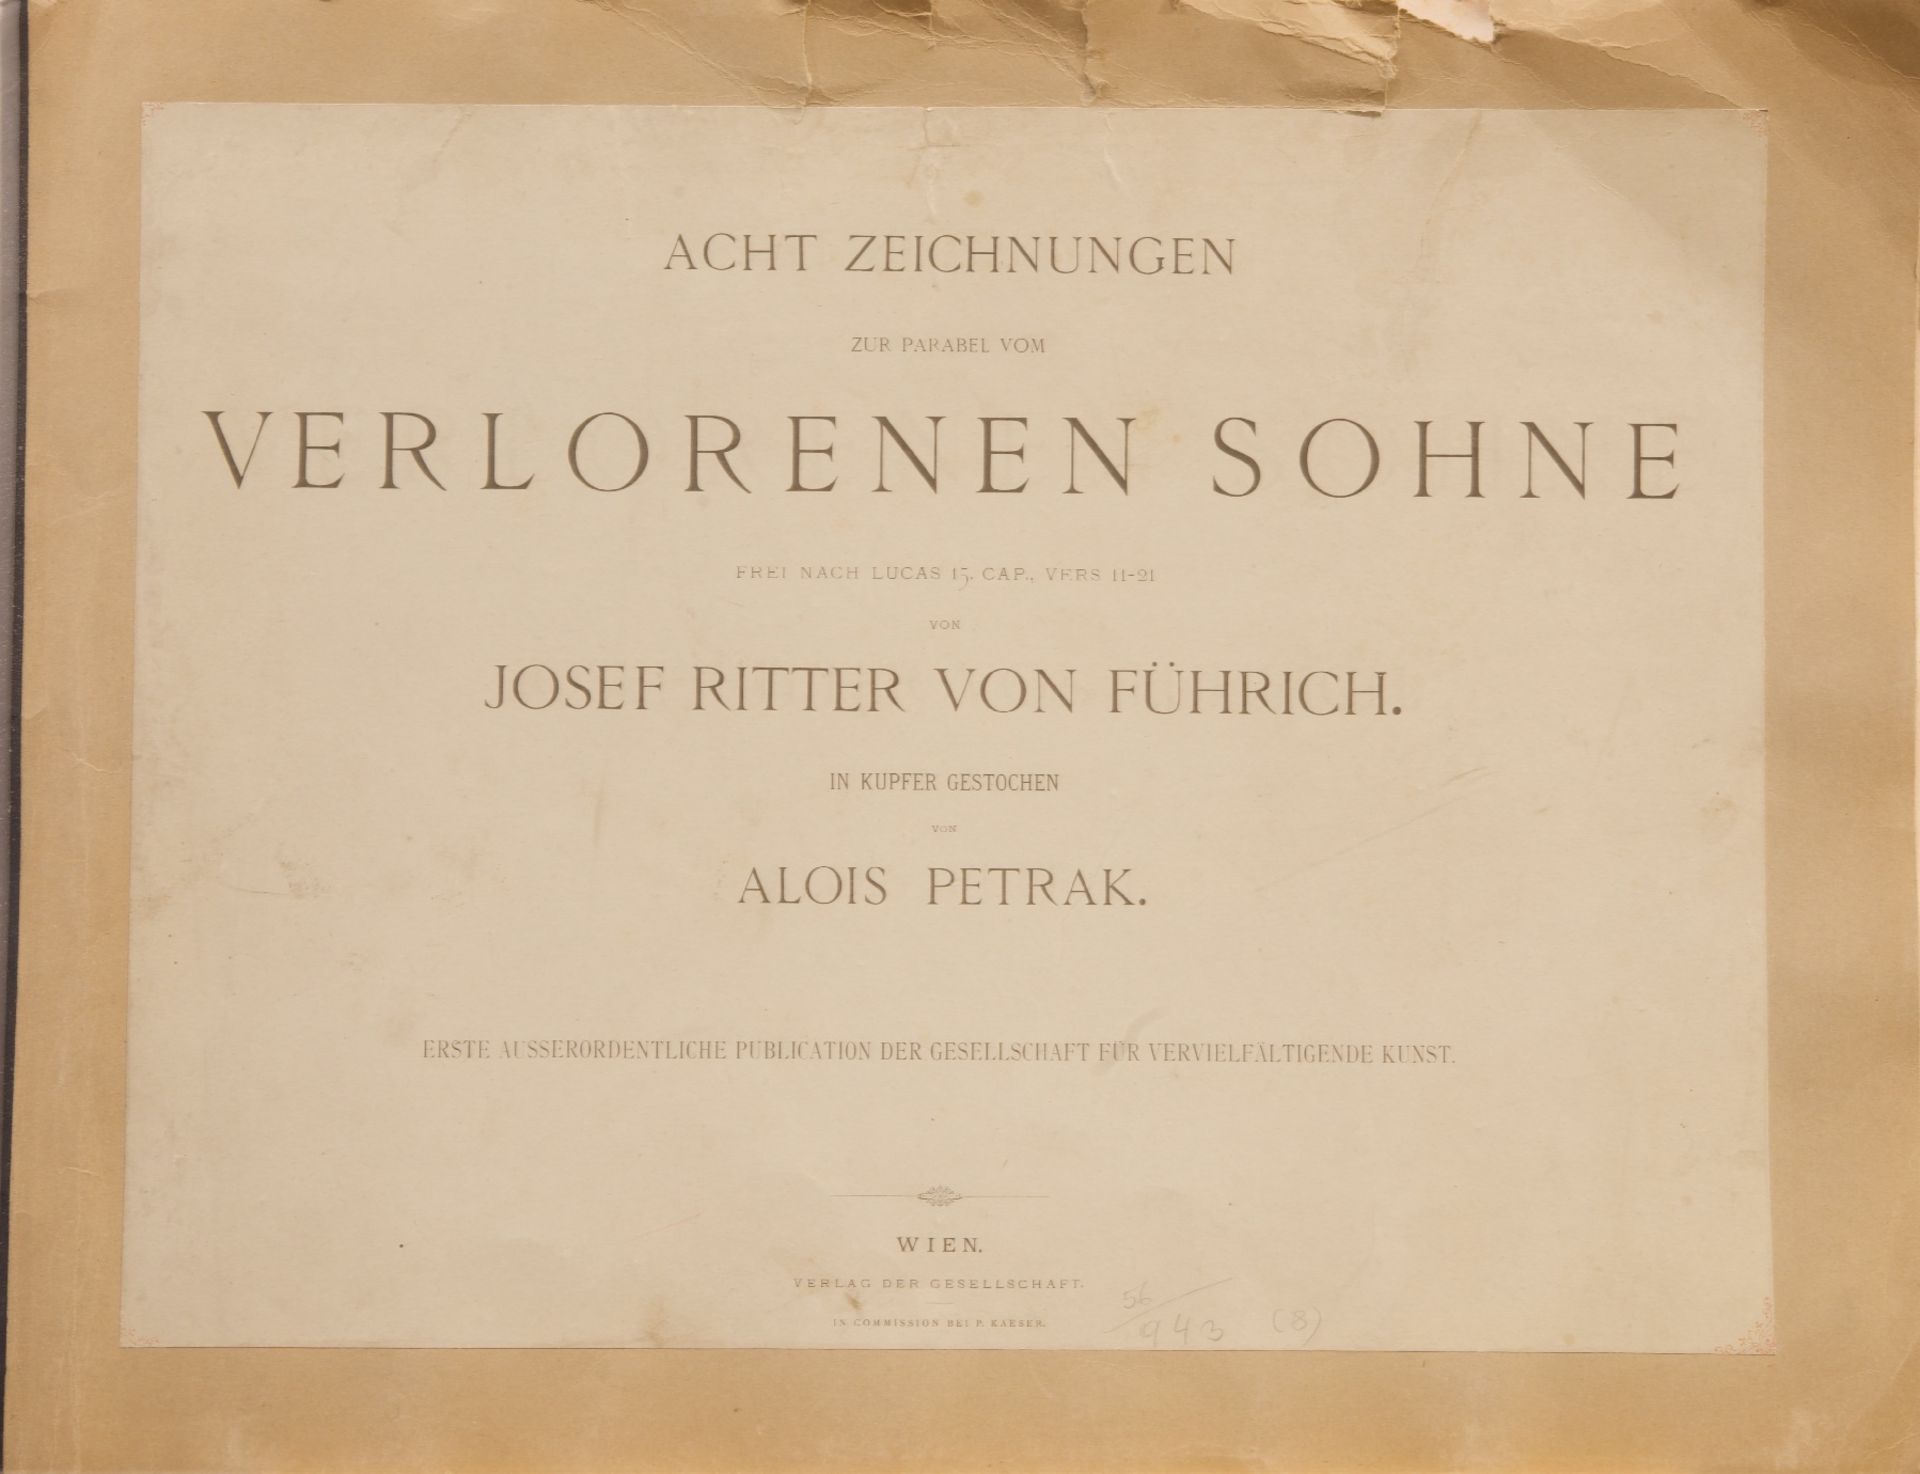 Alois Petrak (1811-1888) and Josef Ritter von Fuehrich (1800-1876), Eight Drawings of the Prodigal S